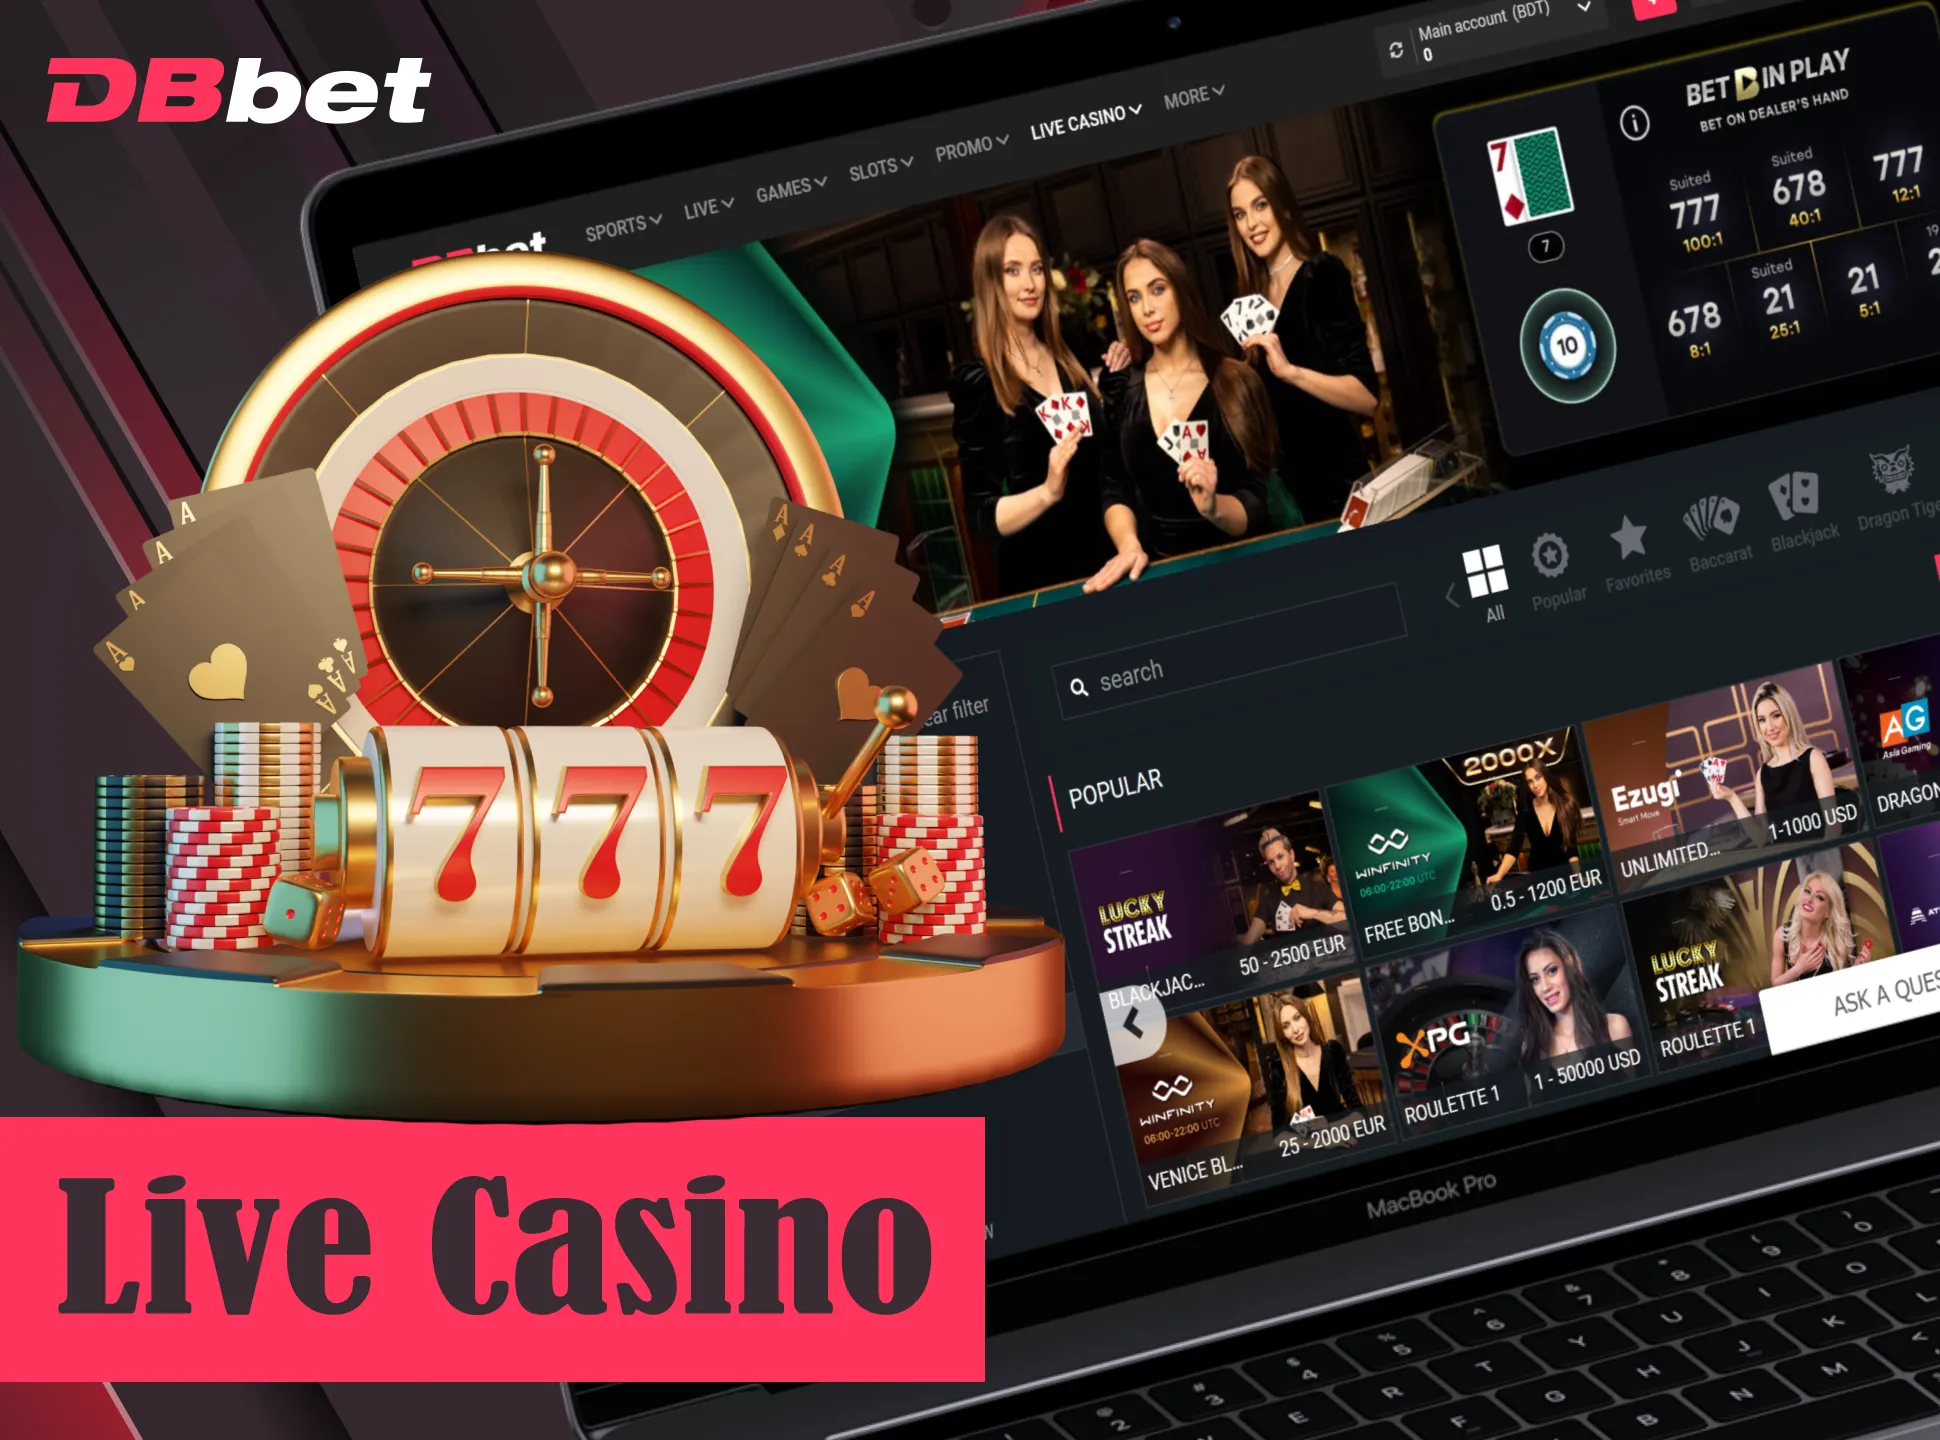 Play casino games with real people at DBbet.